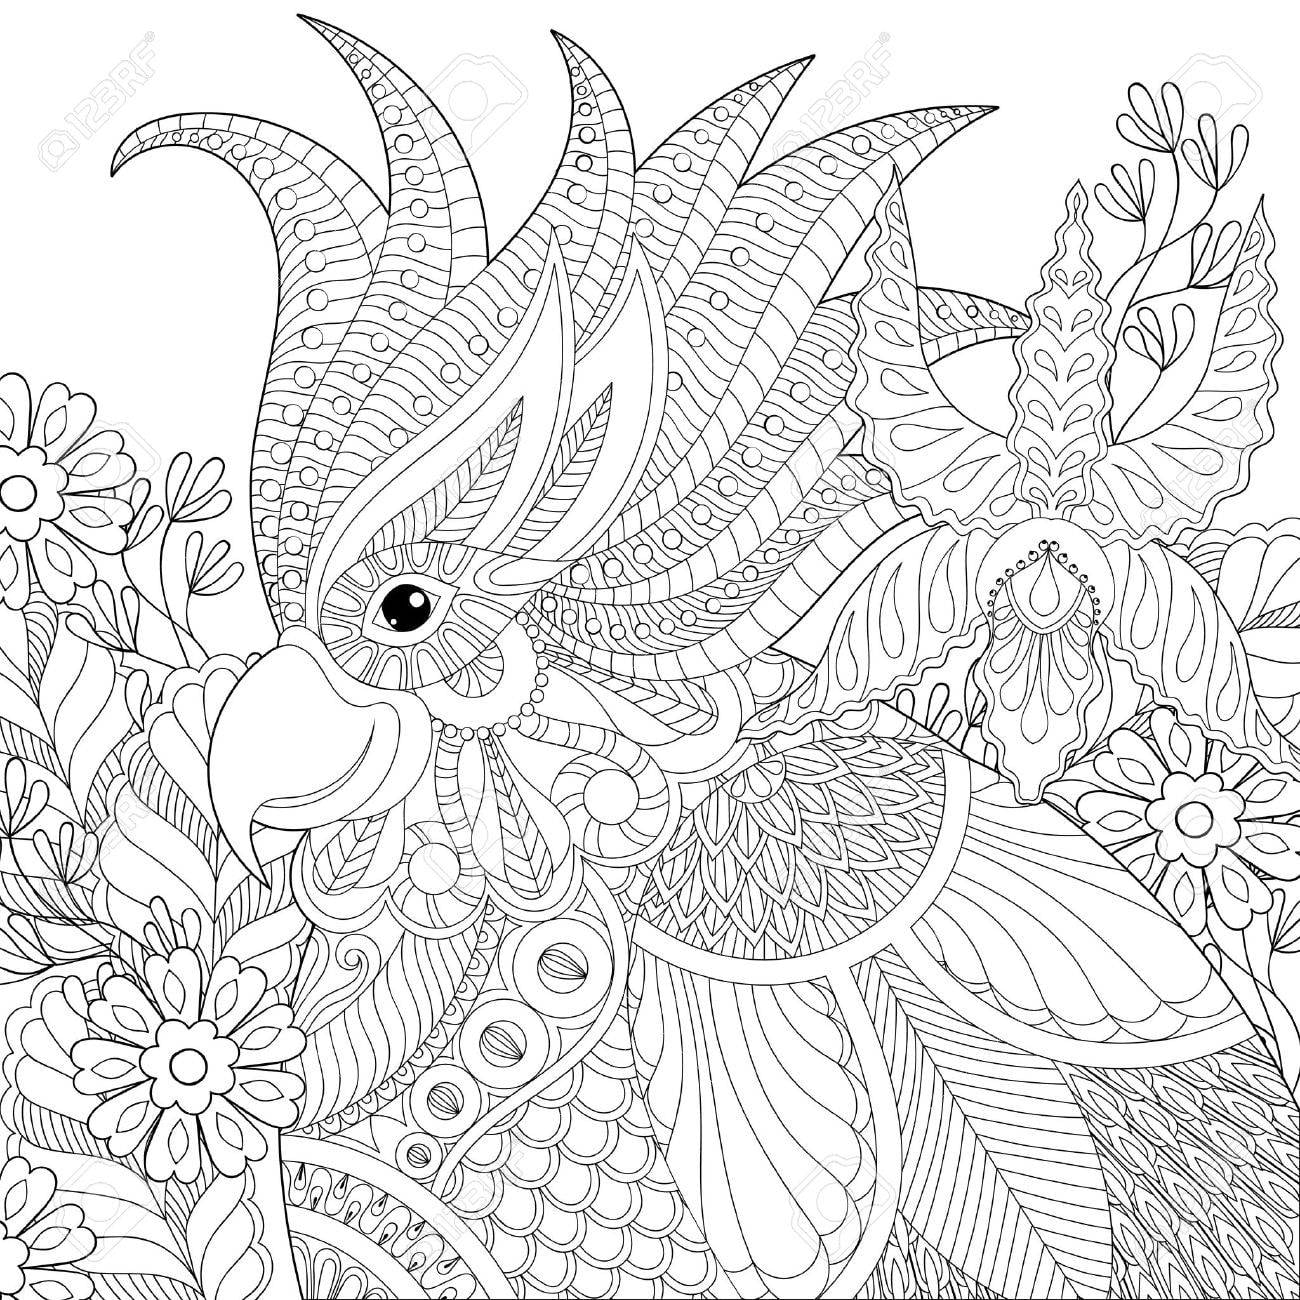 Exotic Zentangle Cockatoo Parrot For Adult Anti Stress Coloring Pages Book Bird Head With Tropical Flowers Plants For Art Therapy Greeting Card Hand Drawn Patterned Illustration Royalty Free SVG Cliparts Vectors And